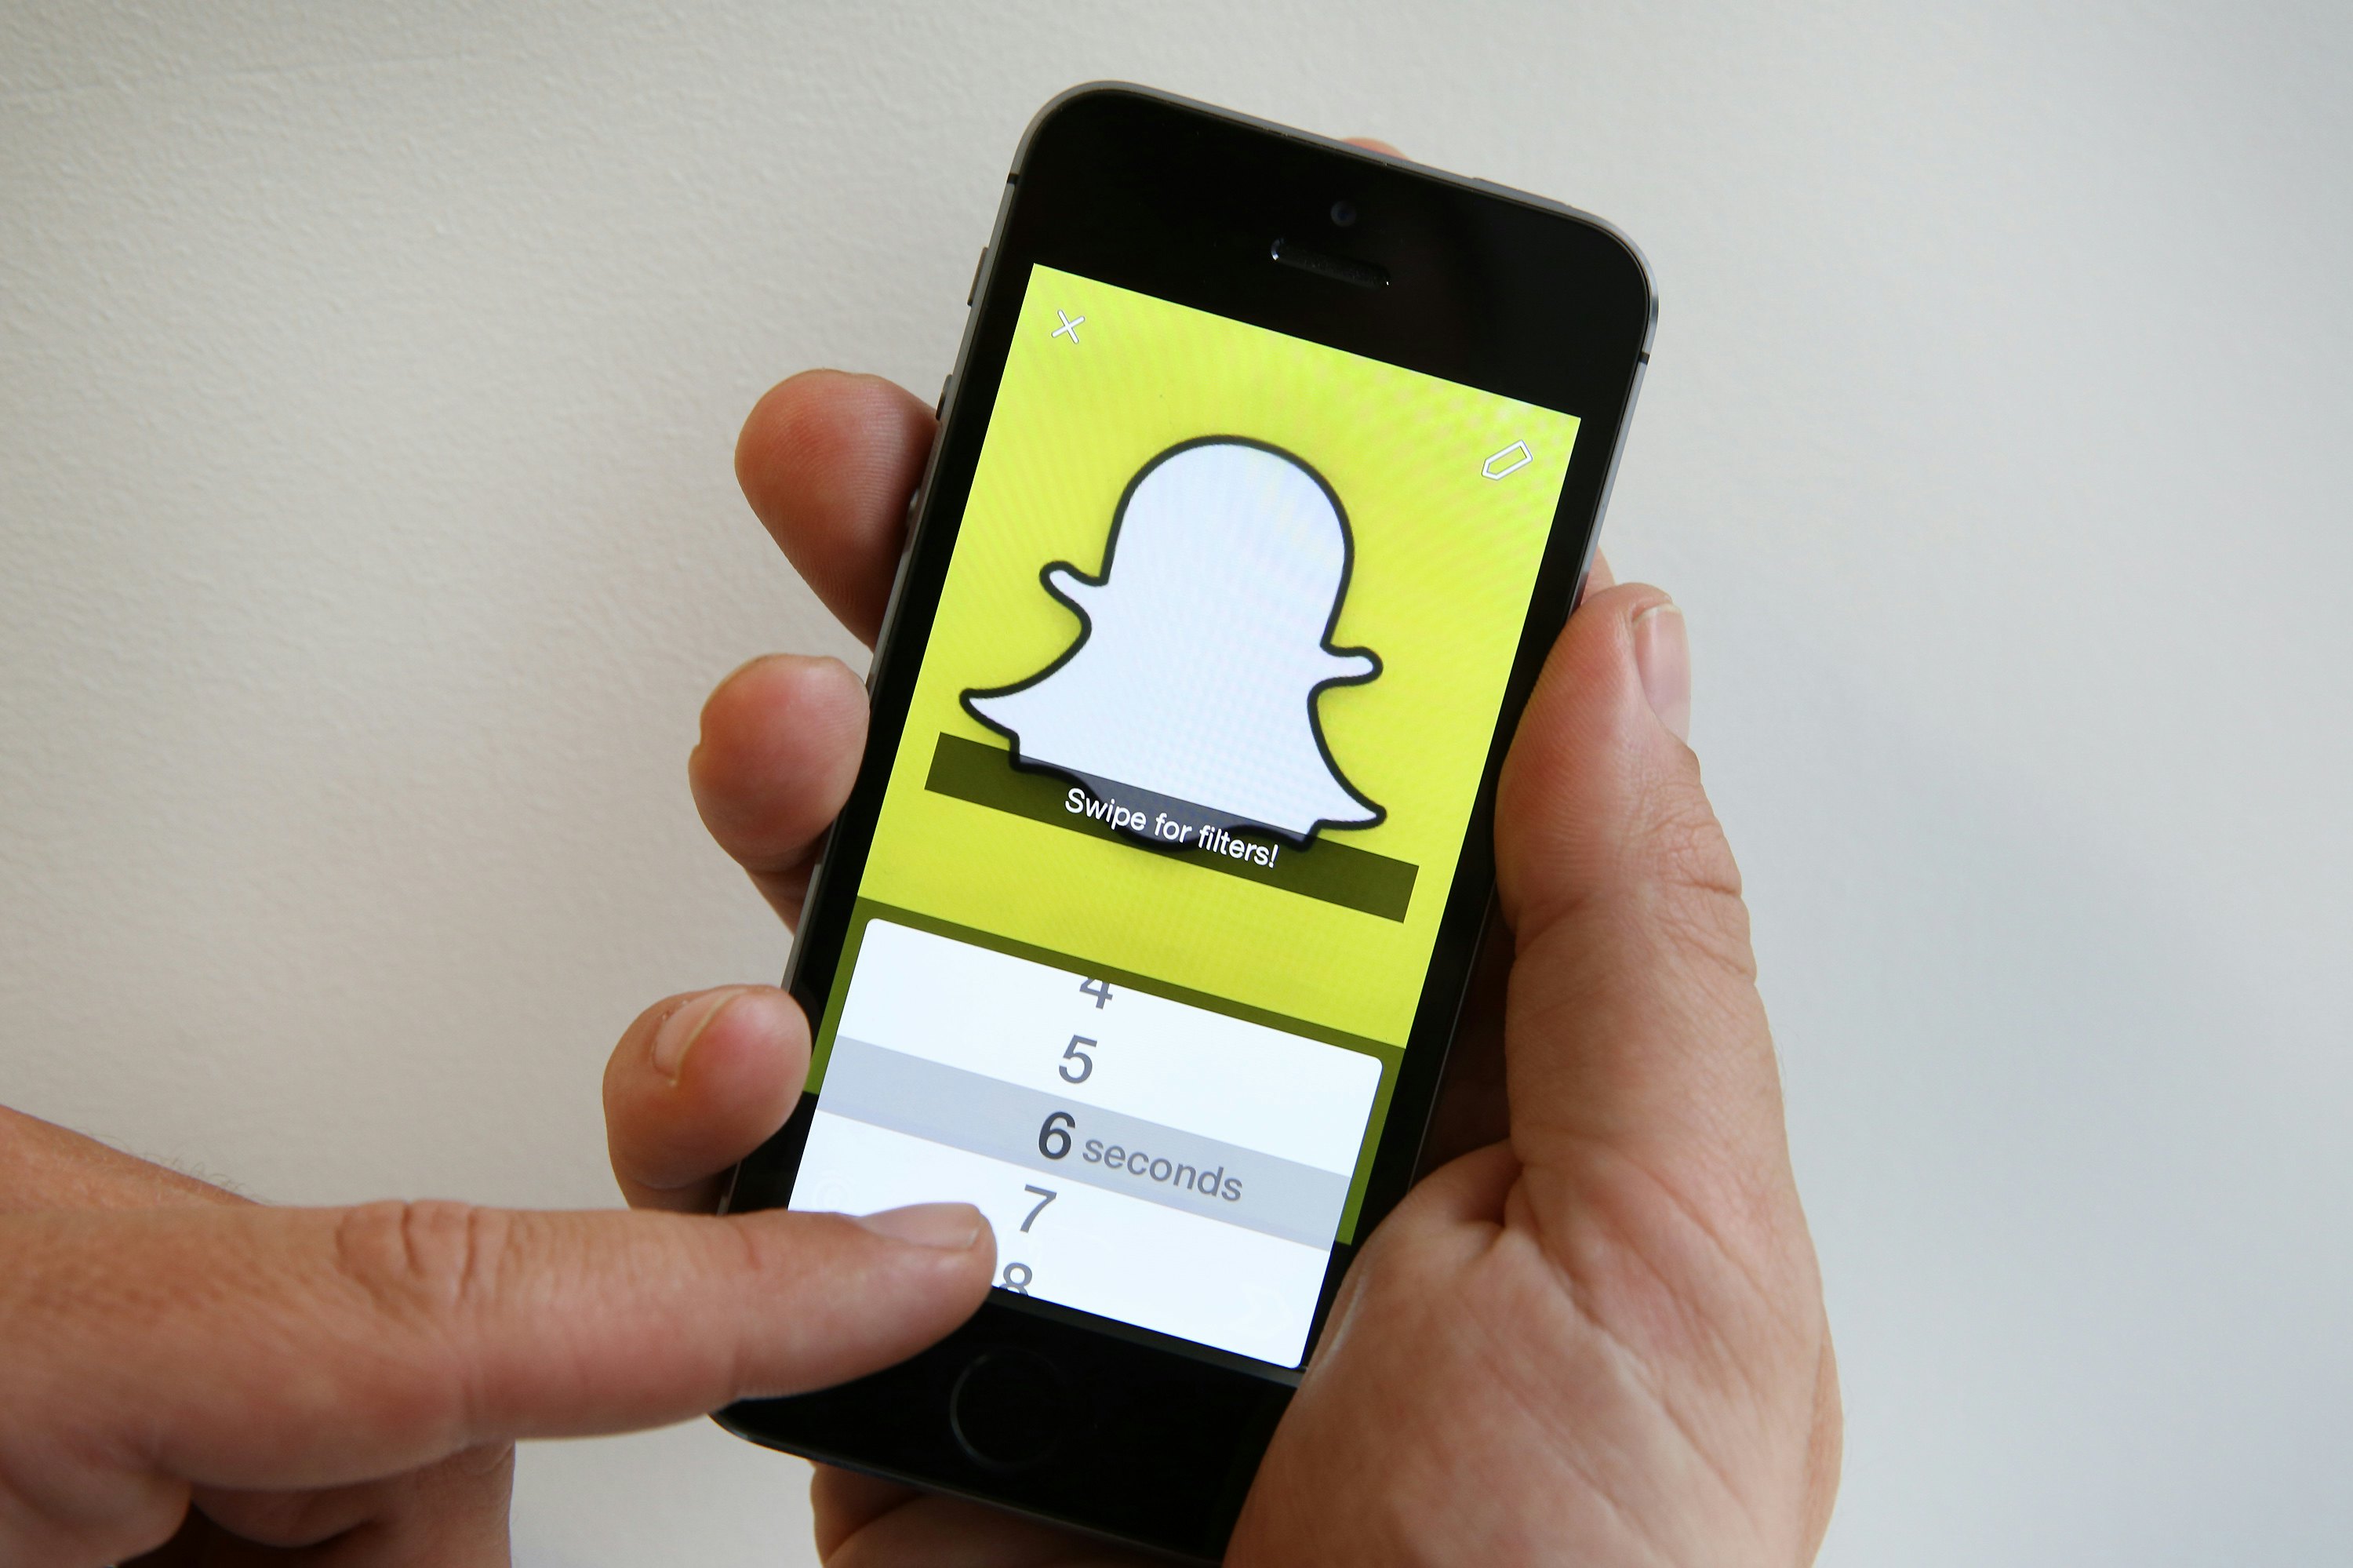 Is SnapChat only for mobile devices, or can it be used in online format?